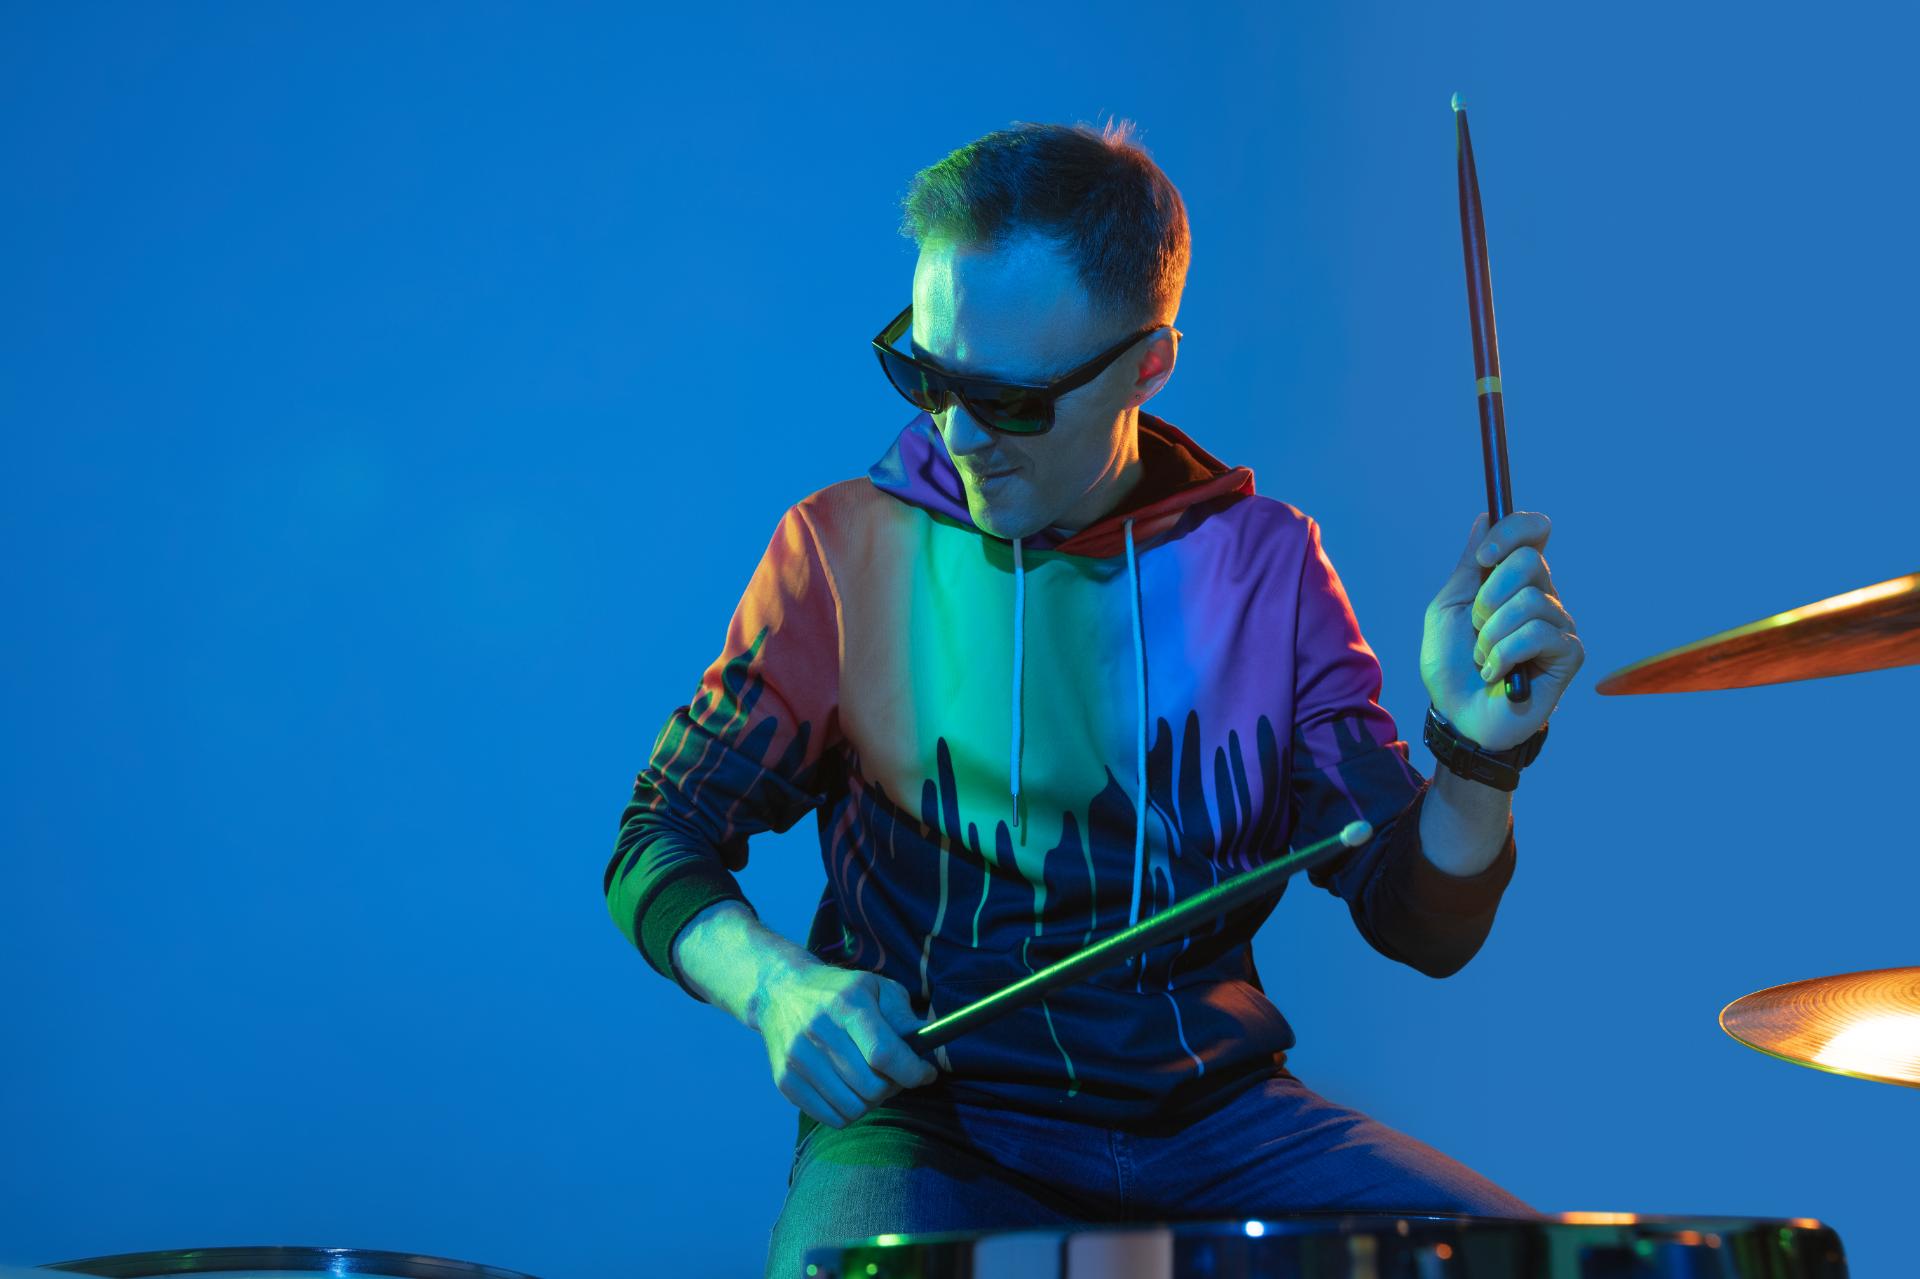 energy-young-inspired-expressive-musician-drummer-performing-gradient-colored-wall-neon-light-...jpg